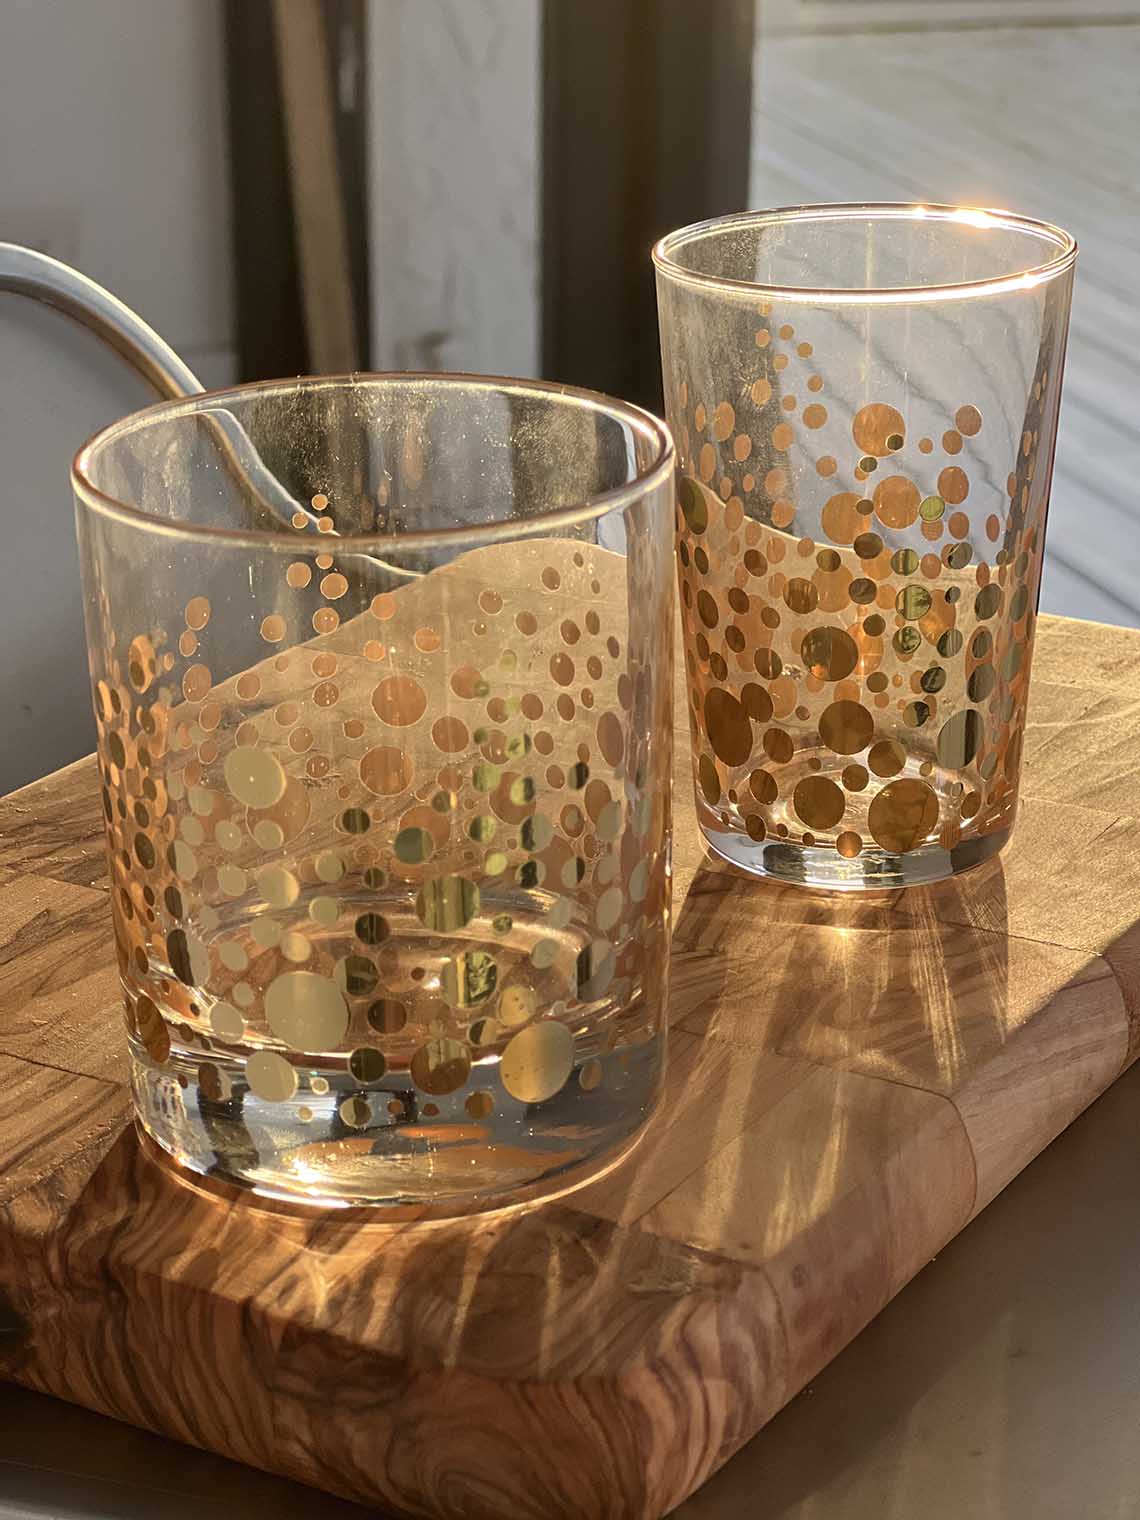 https://www.scentsandfeel.com/wp-content/uploads/2023/01/dots-gold-design-morocaan-hand-painted-drinking-and-tea-glasses.jpg